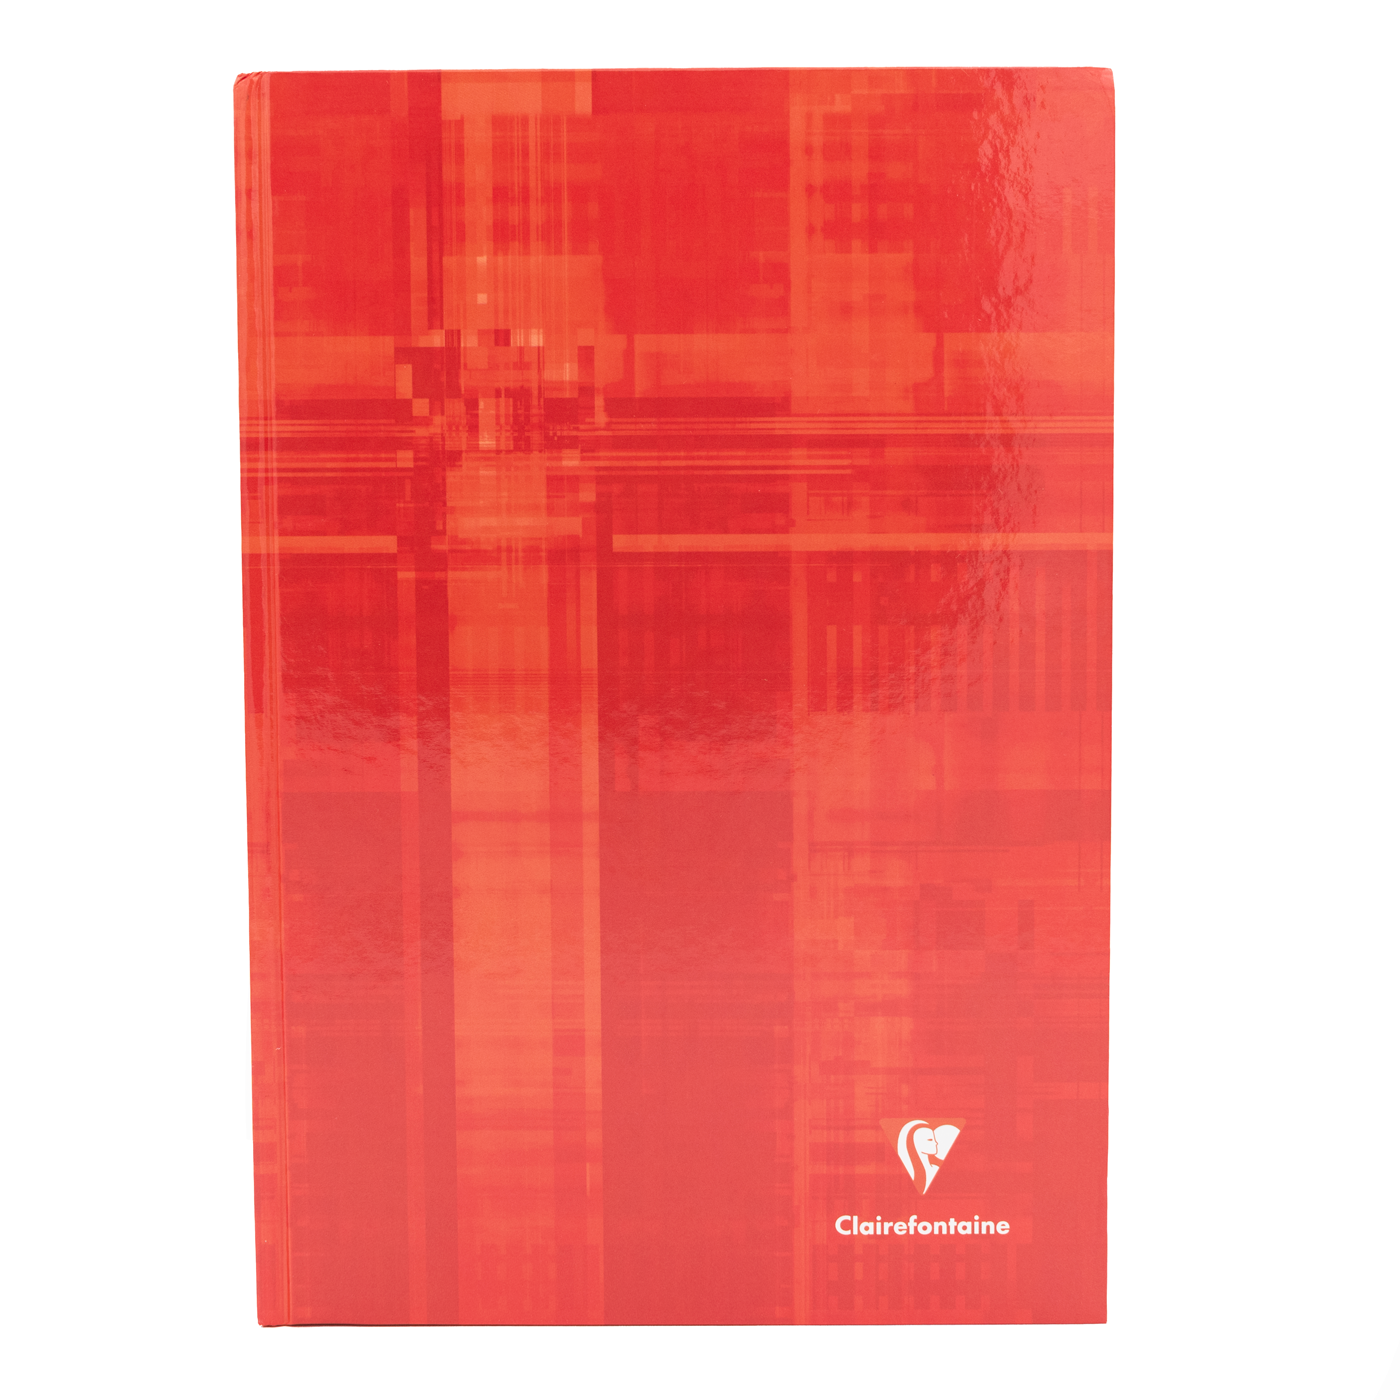 Clairefontaine Hardcover Ruled A4